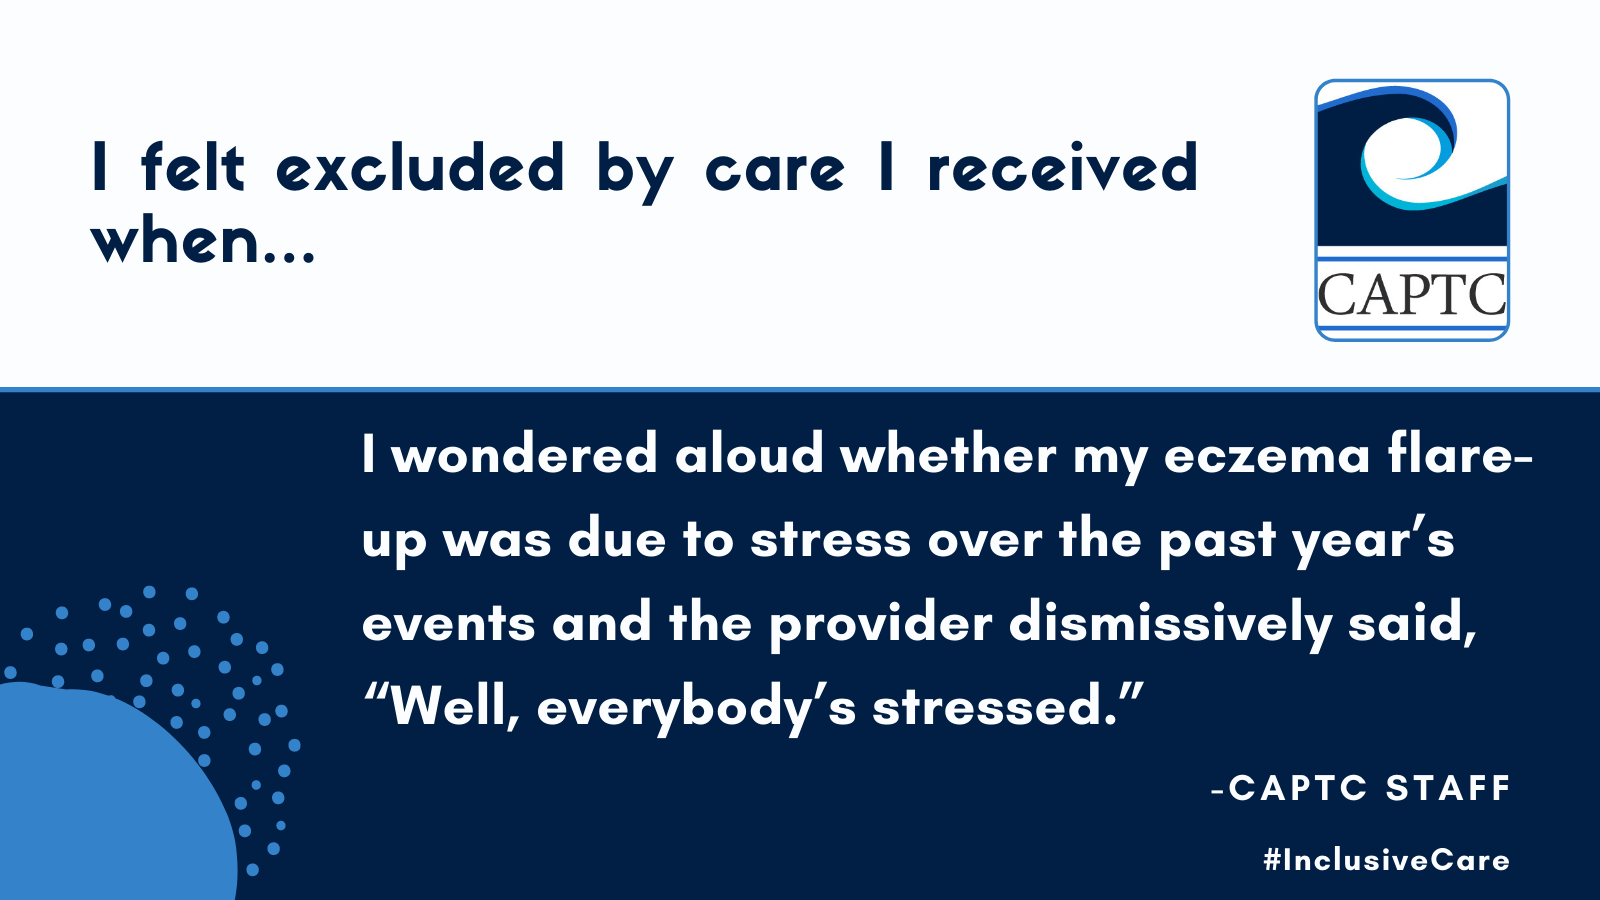 I felt excluded by care I received when I wondered aloud whether my eczema flare-up was due to stress over the past year’s events and the provider dismissively said, “Well, everybody’s stressed.” CAPTC staff